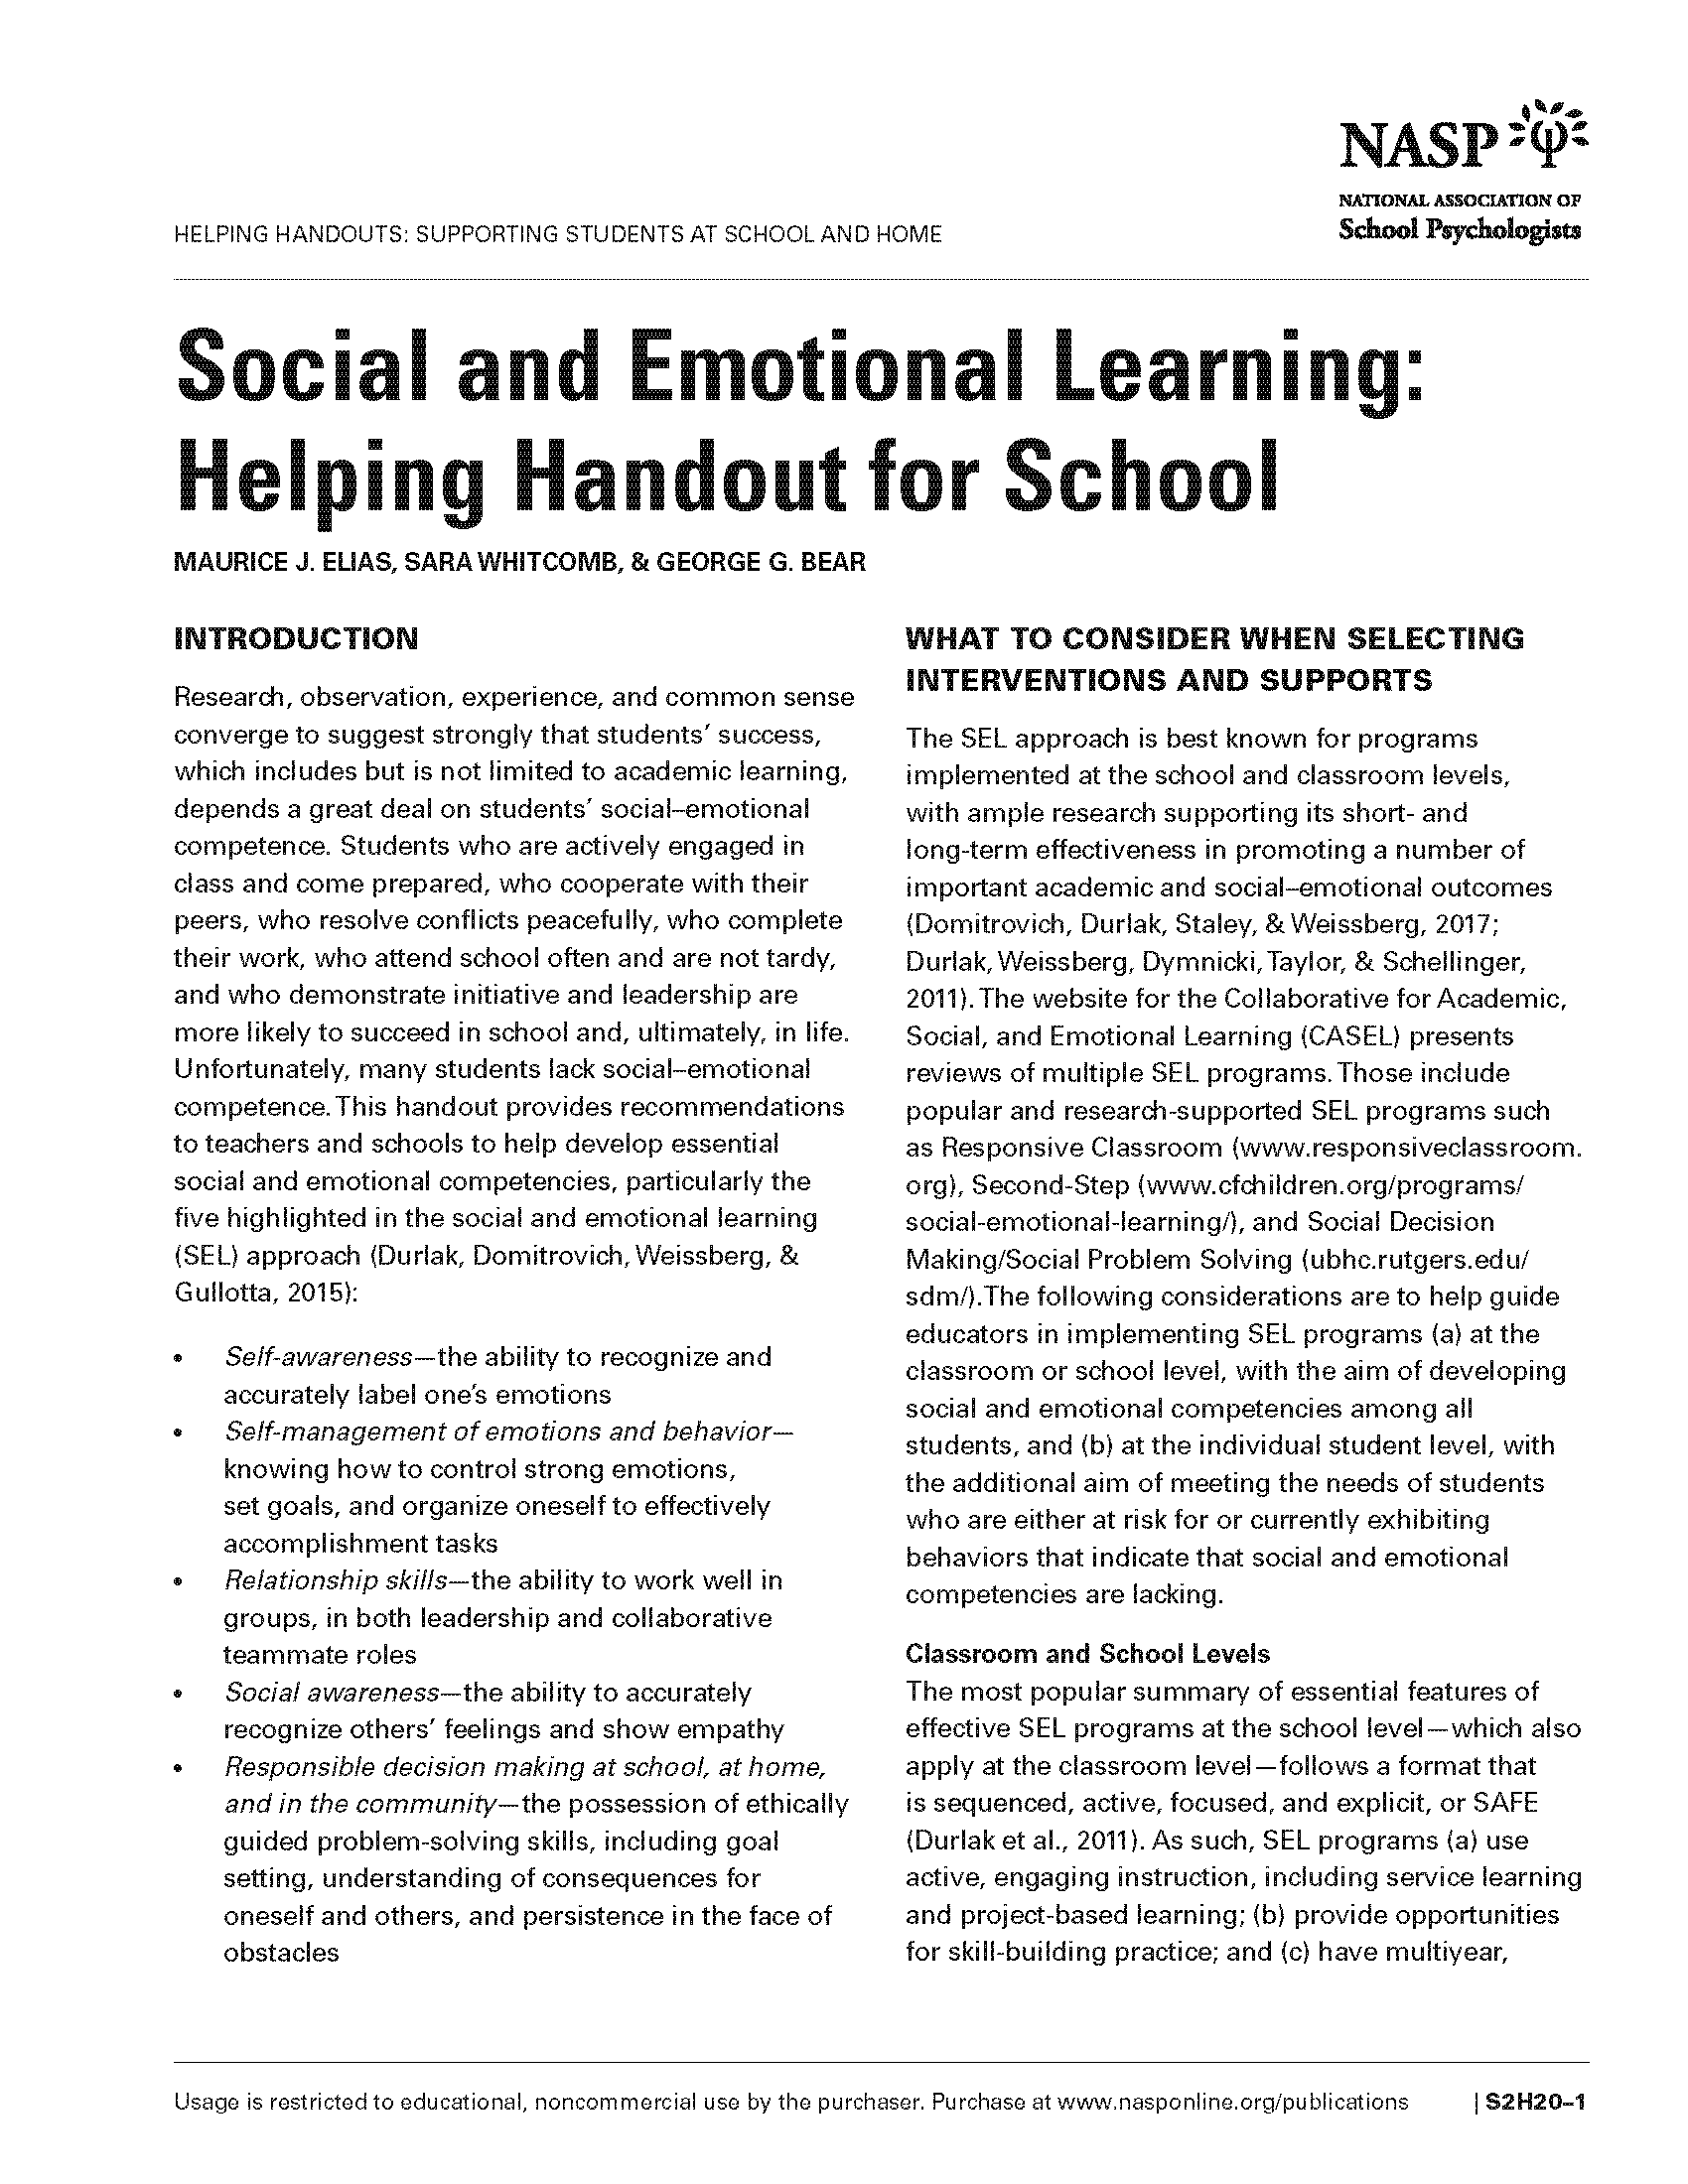 Social and Emotional Learning: Helping Handout for School 